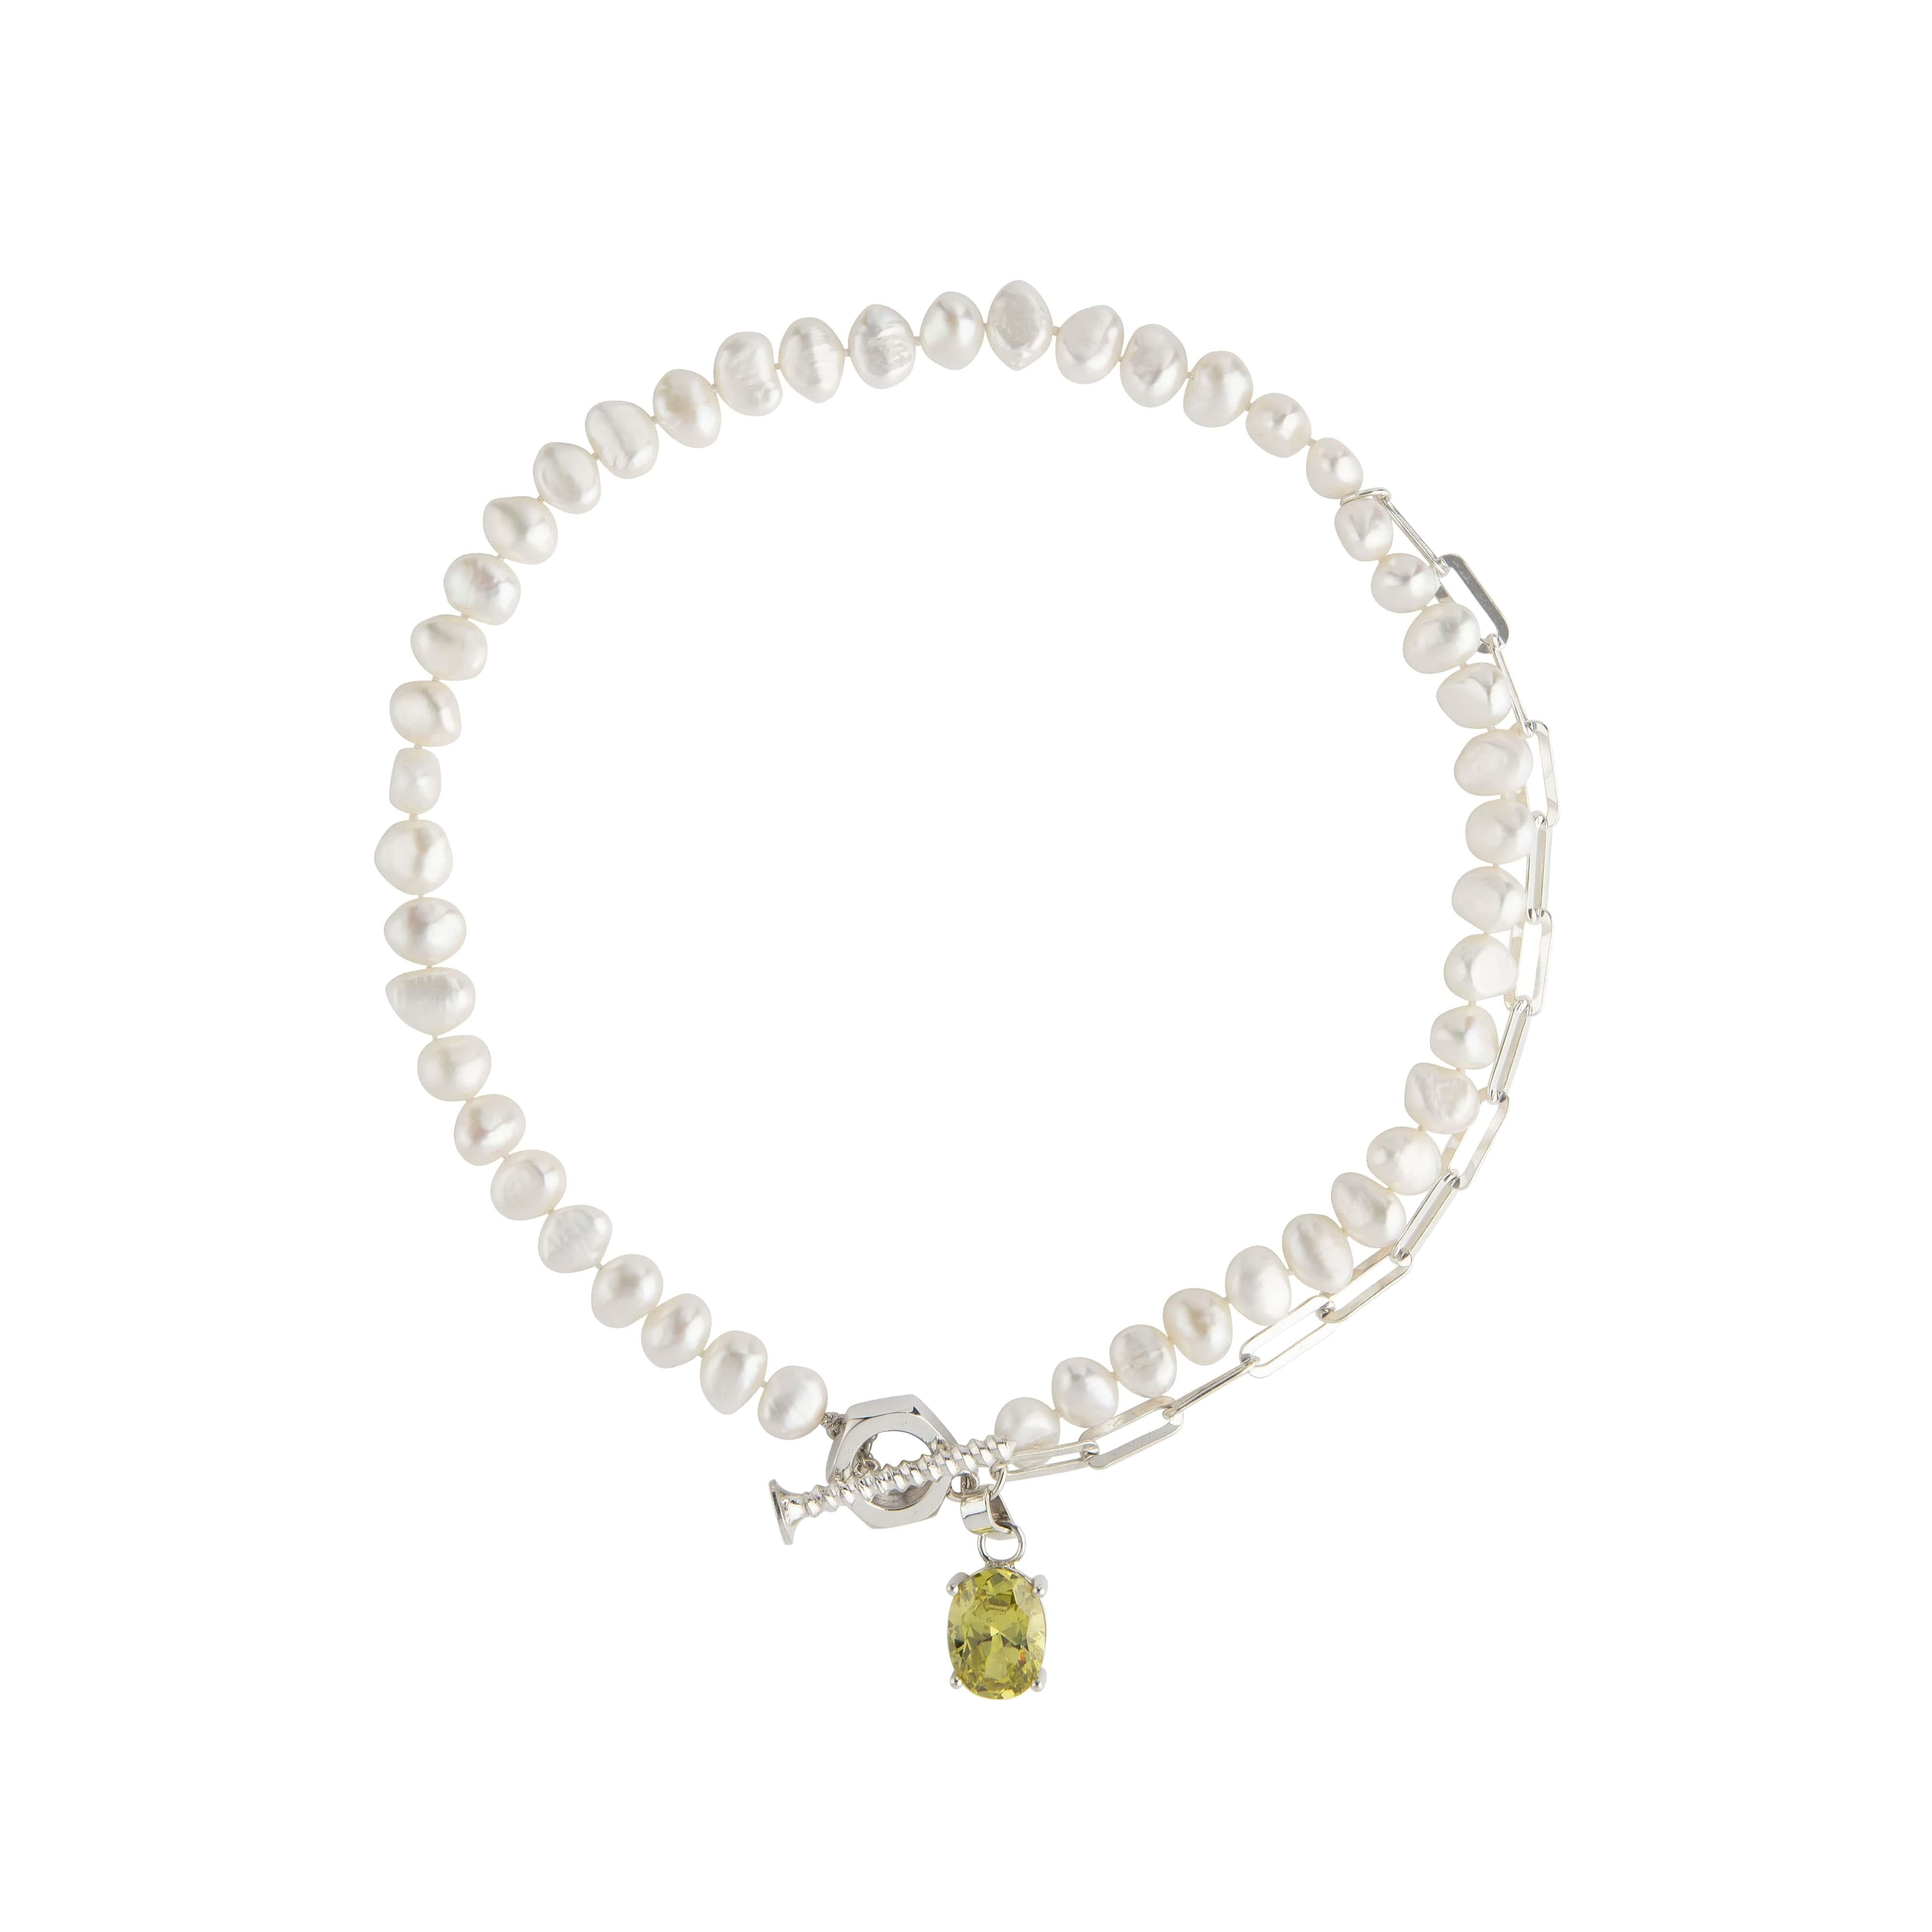 Pearl Necklace with Sterling Silver Chain and Big Peridot Zirconia Stone For Sale